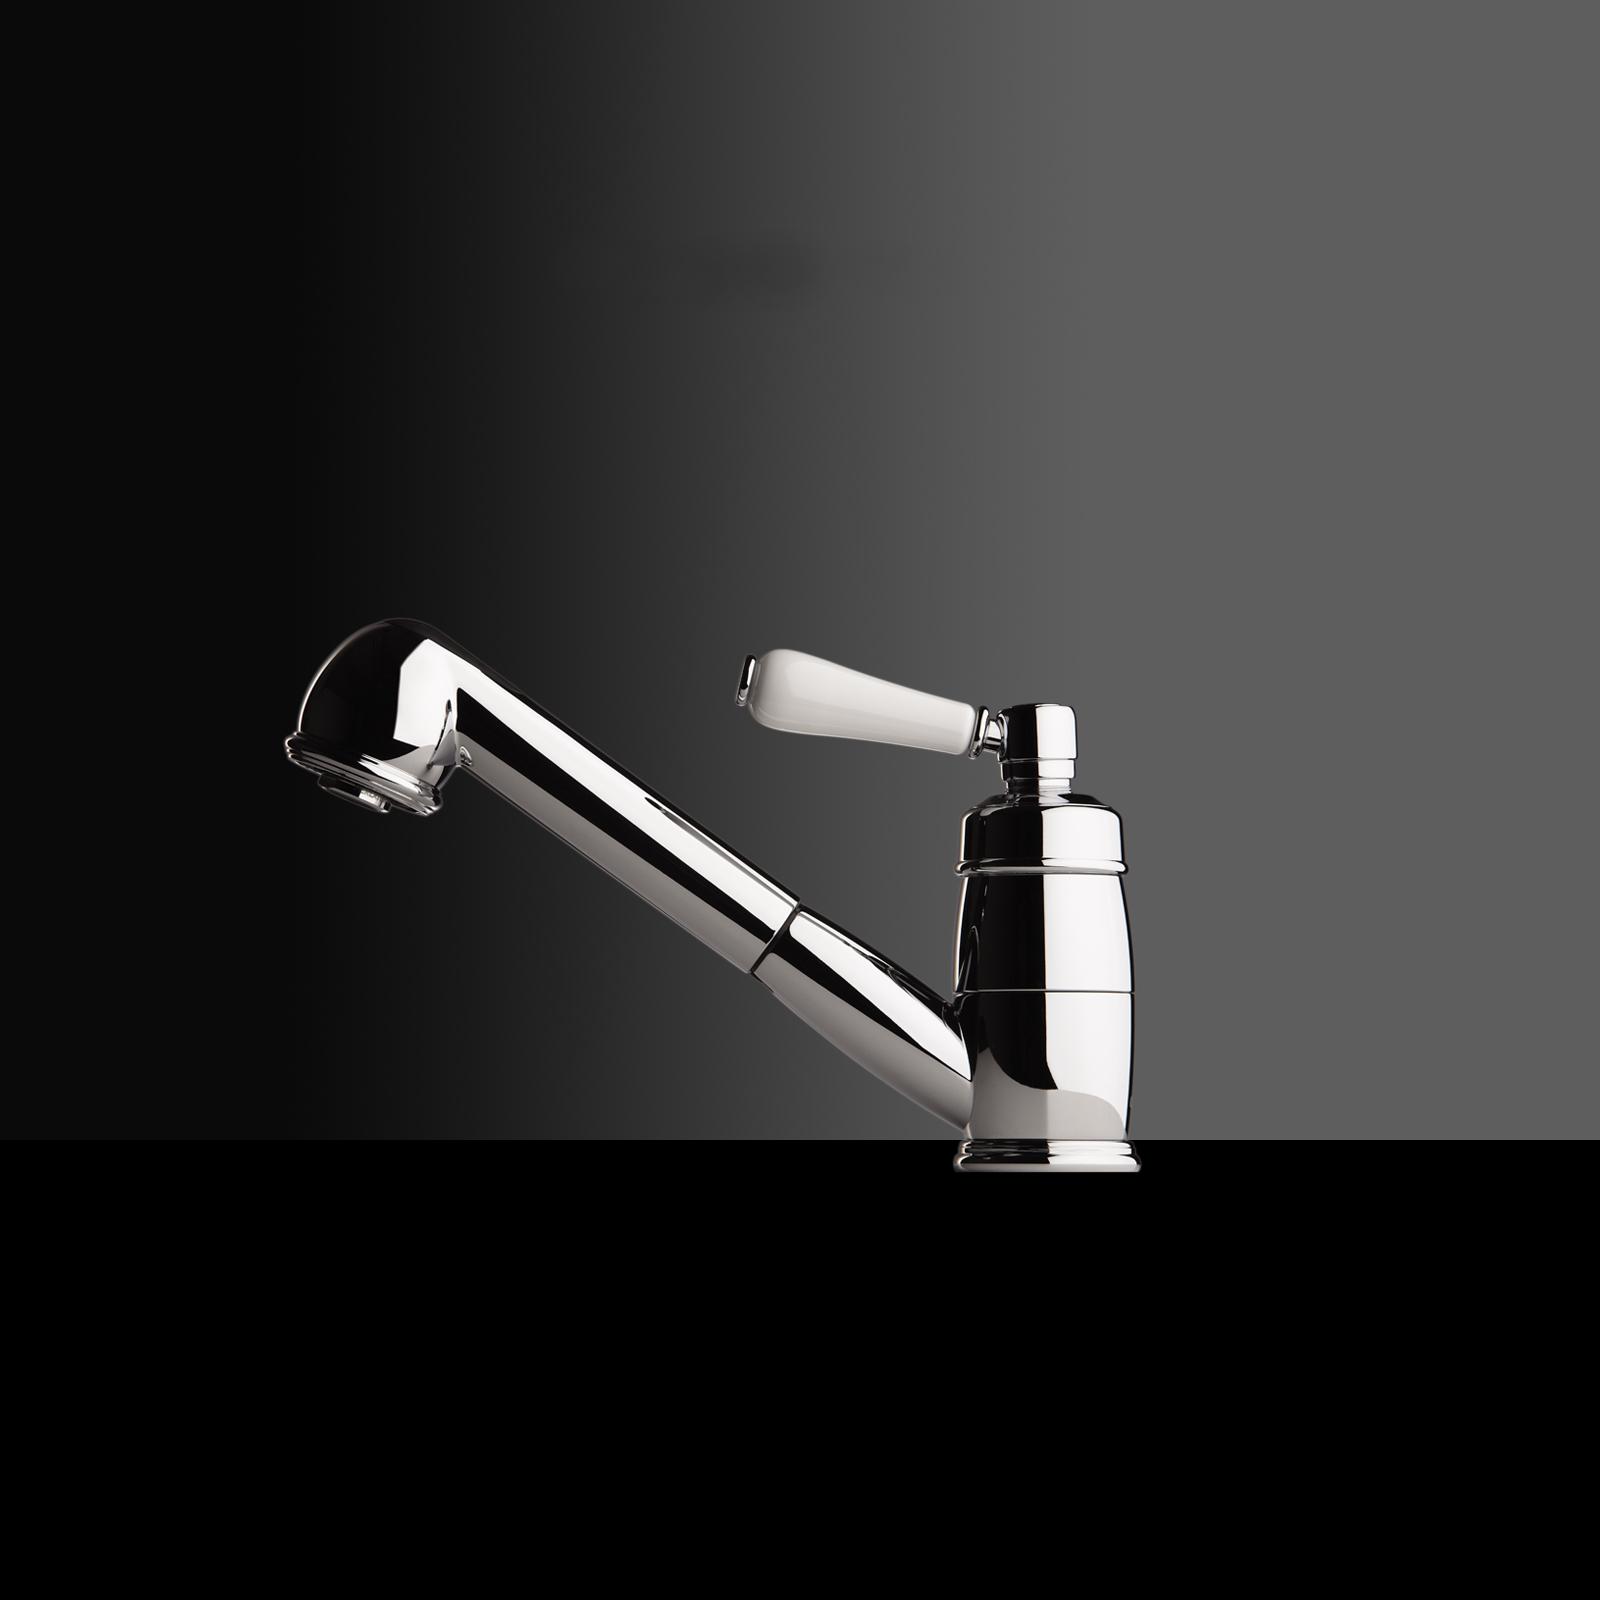 High-quality single lever tap Lionor - pull out spray - Chrome